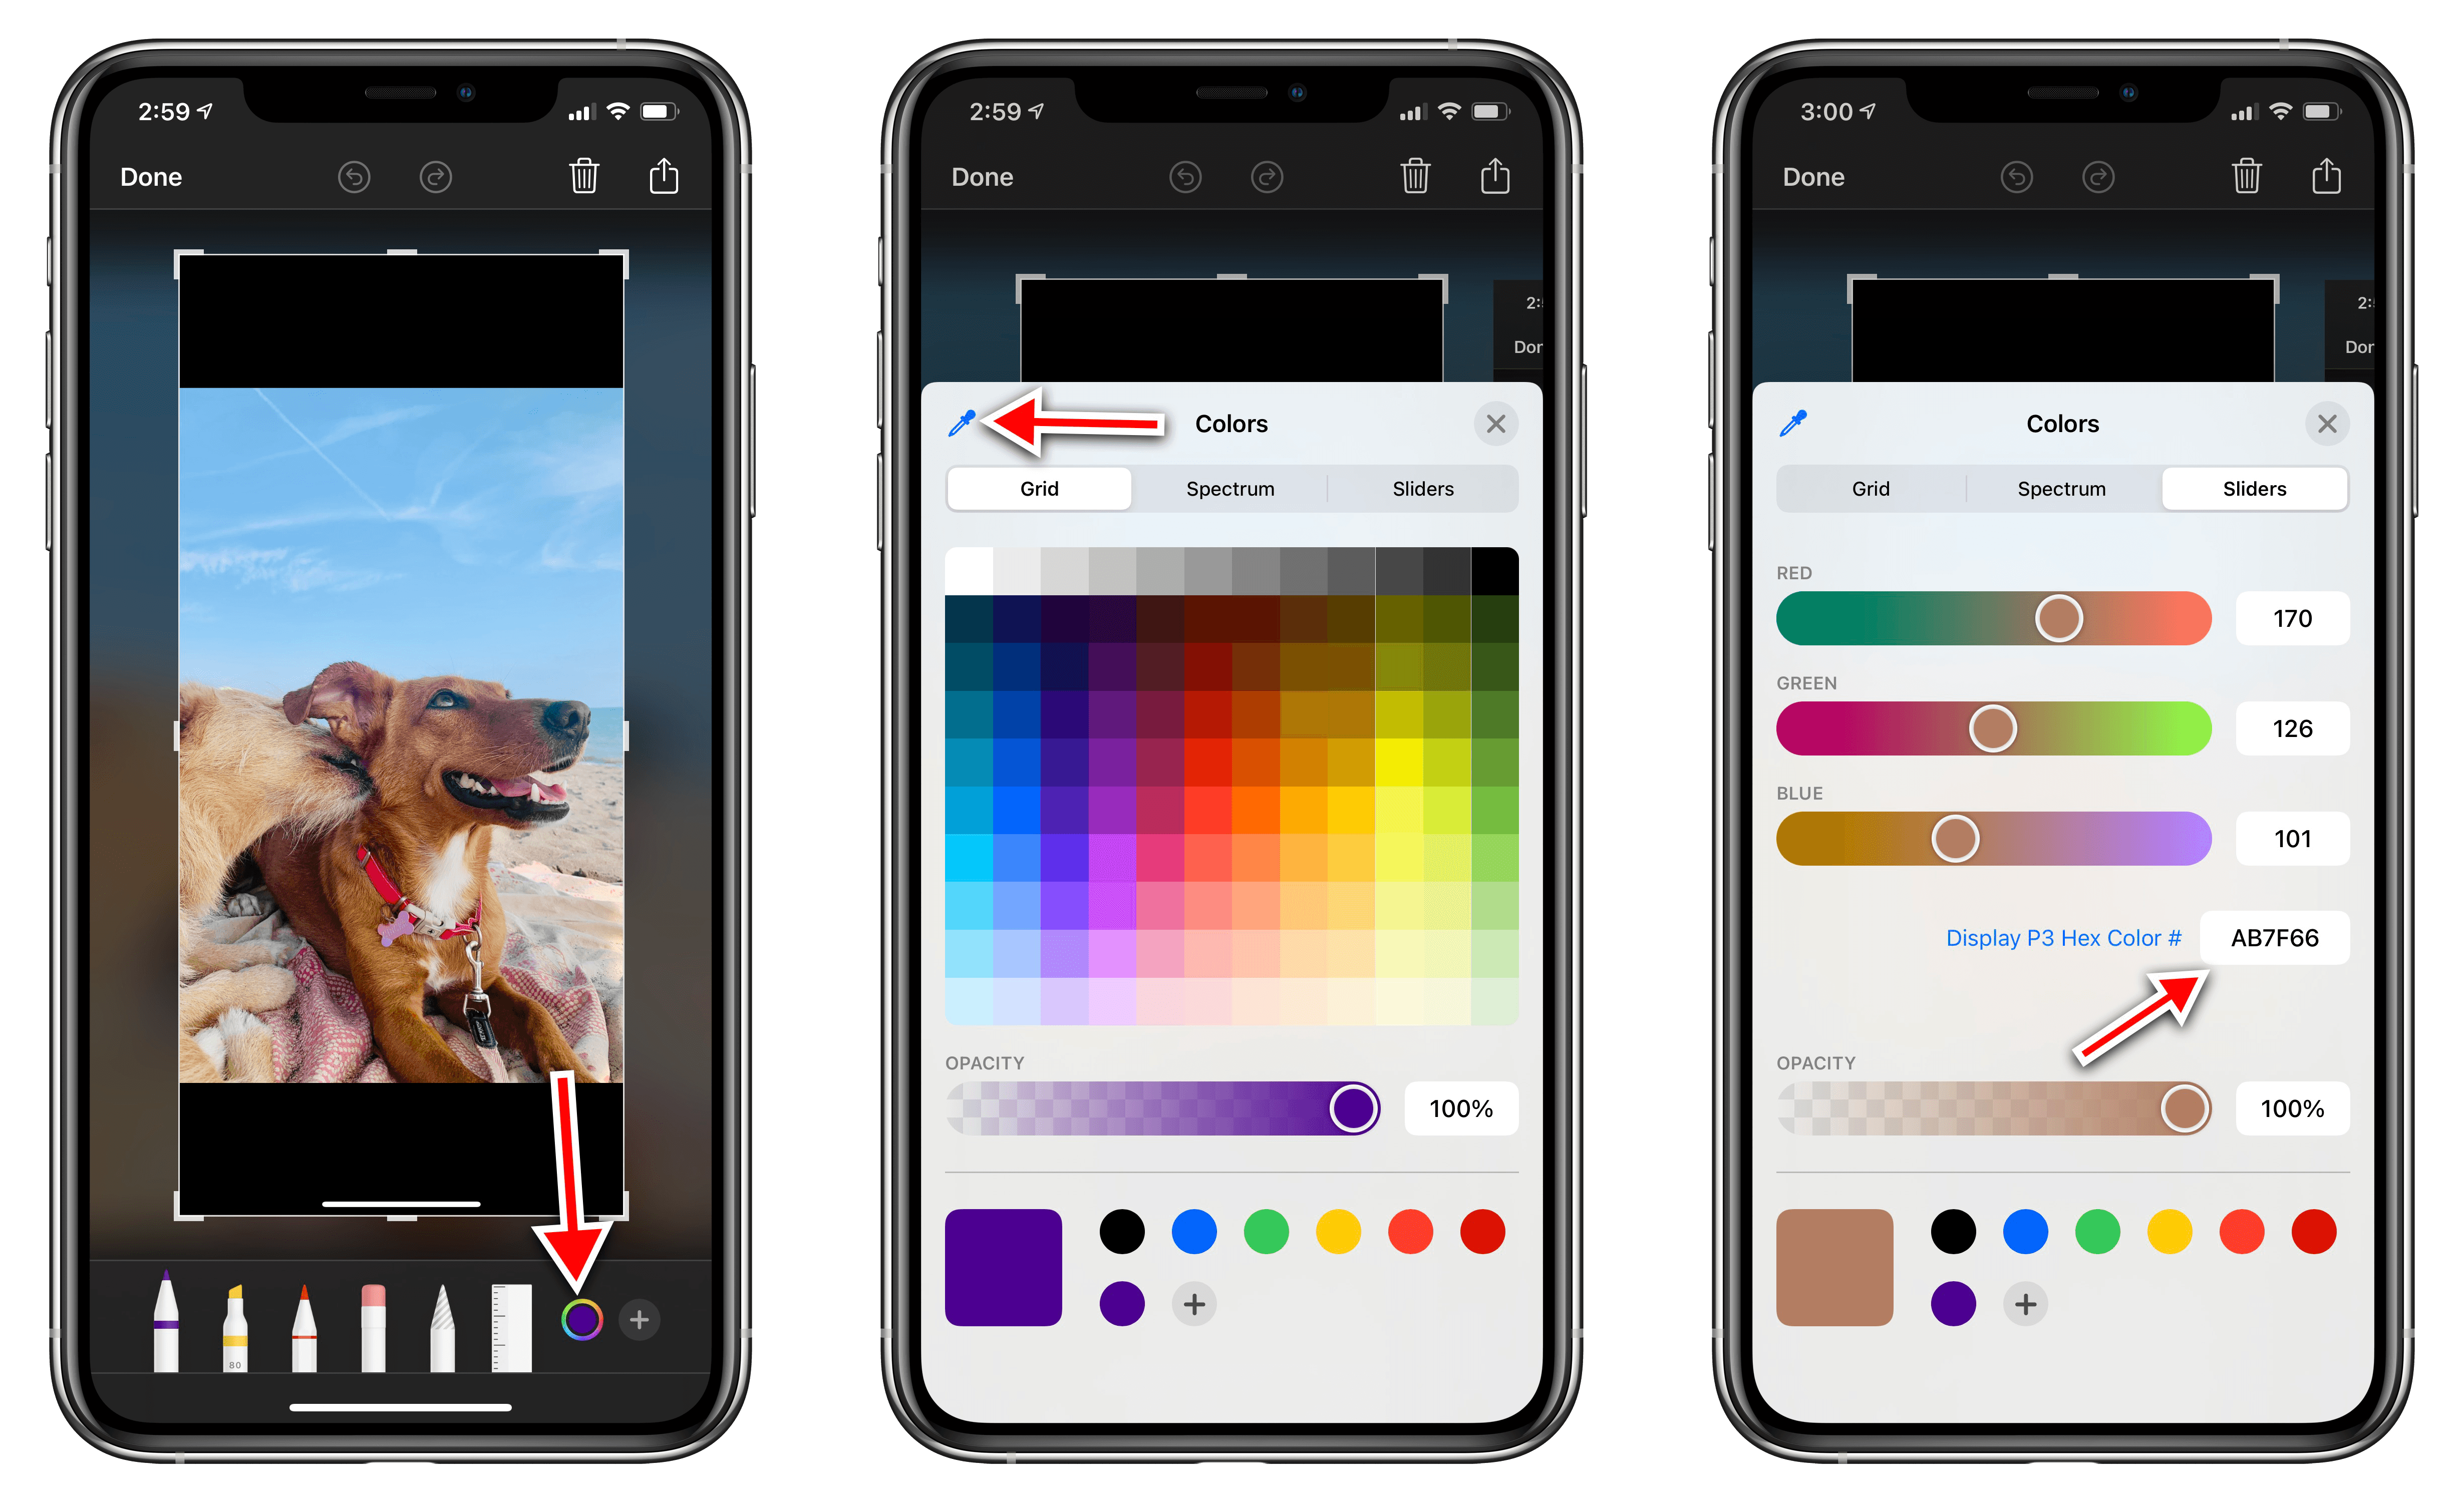 You can save any color from any photo using iOS 14's new color picker.